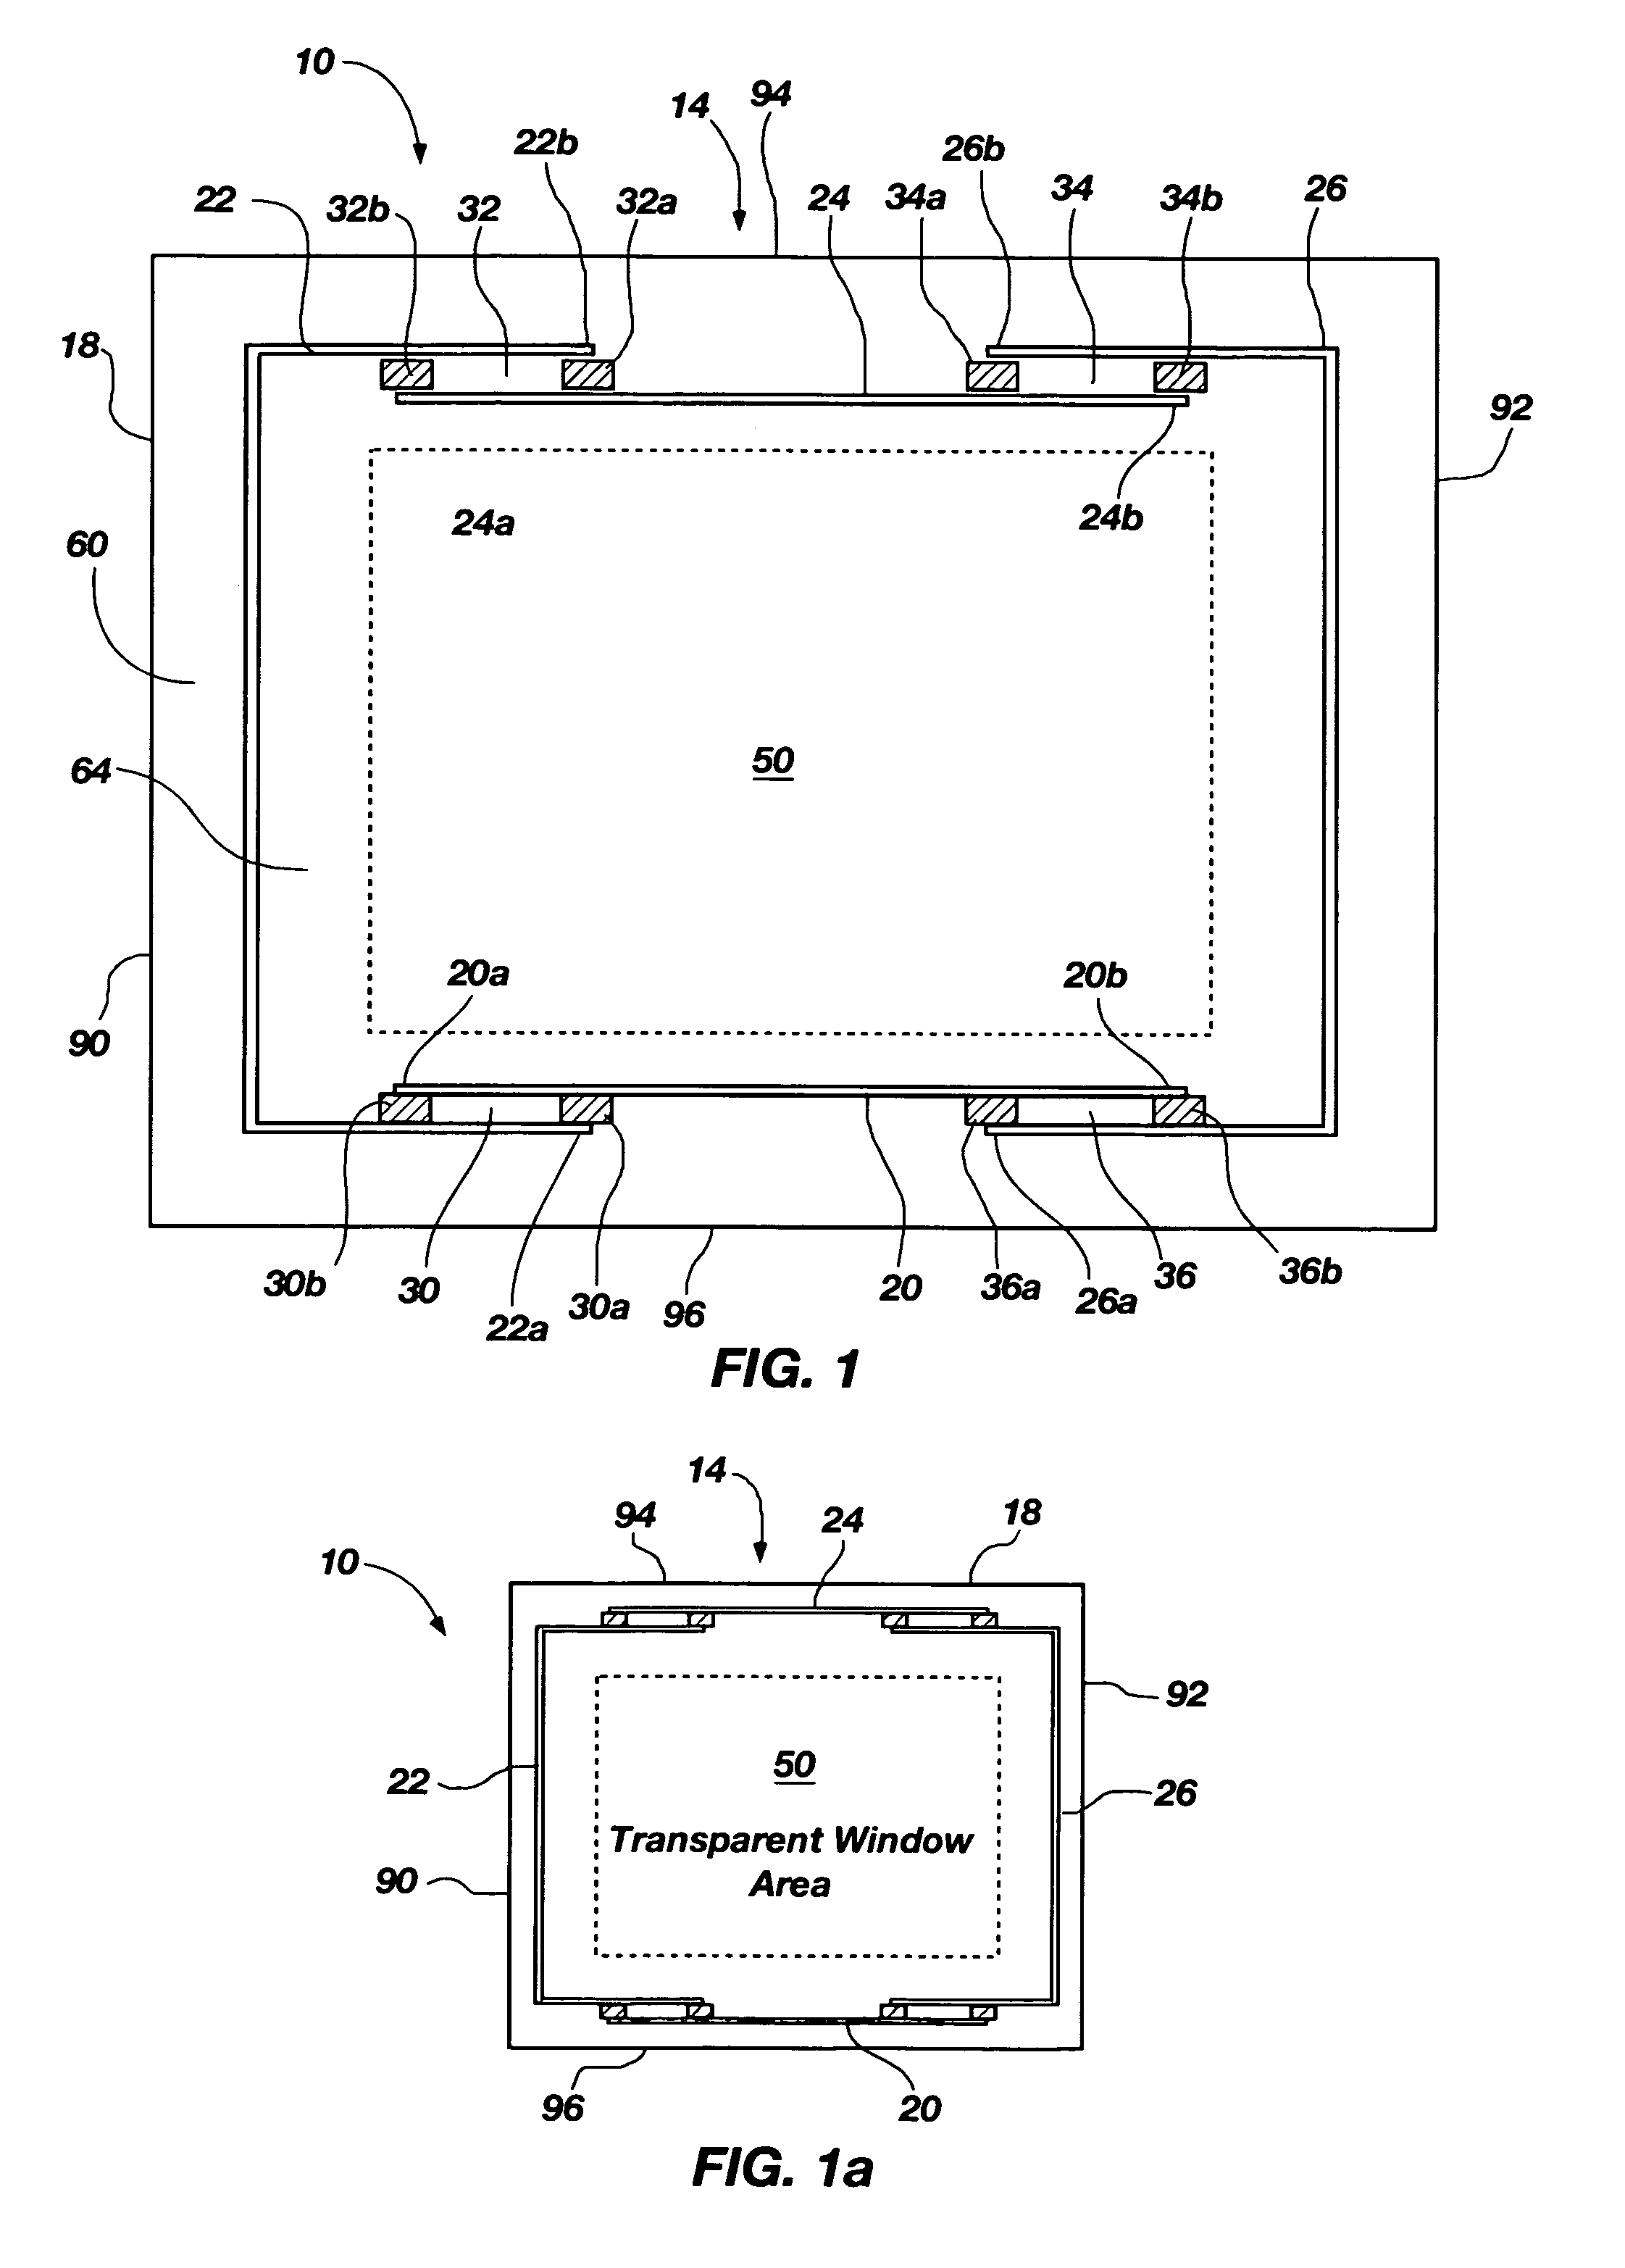 Force-based input device